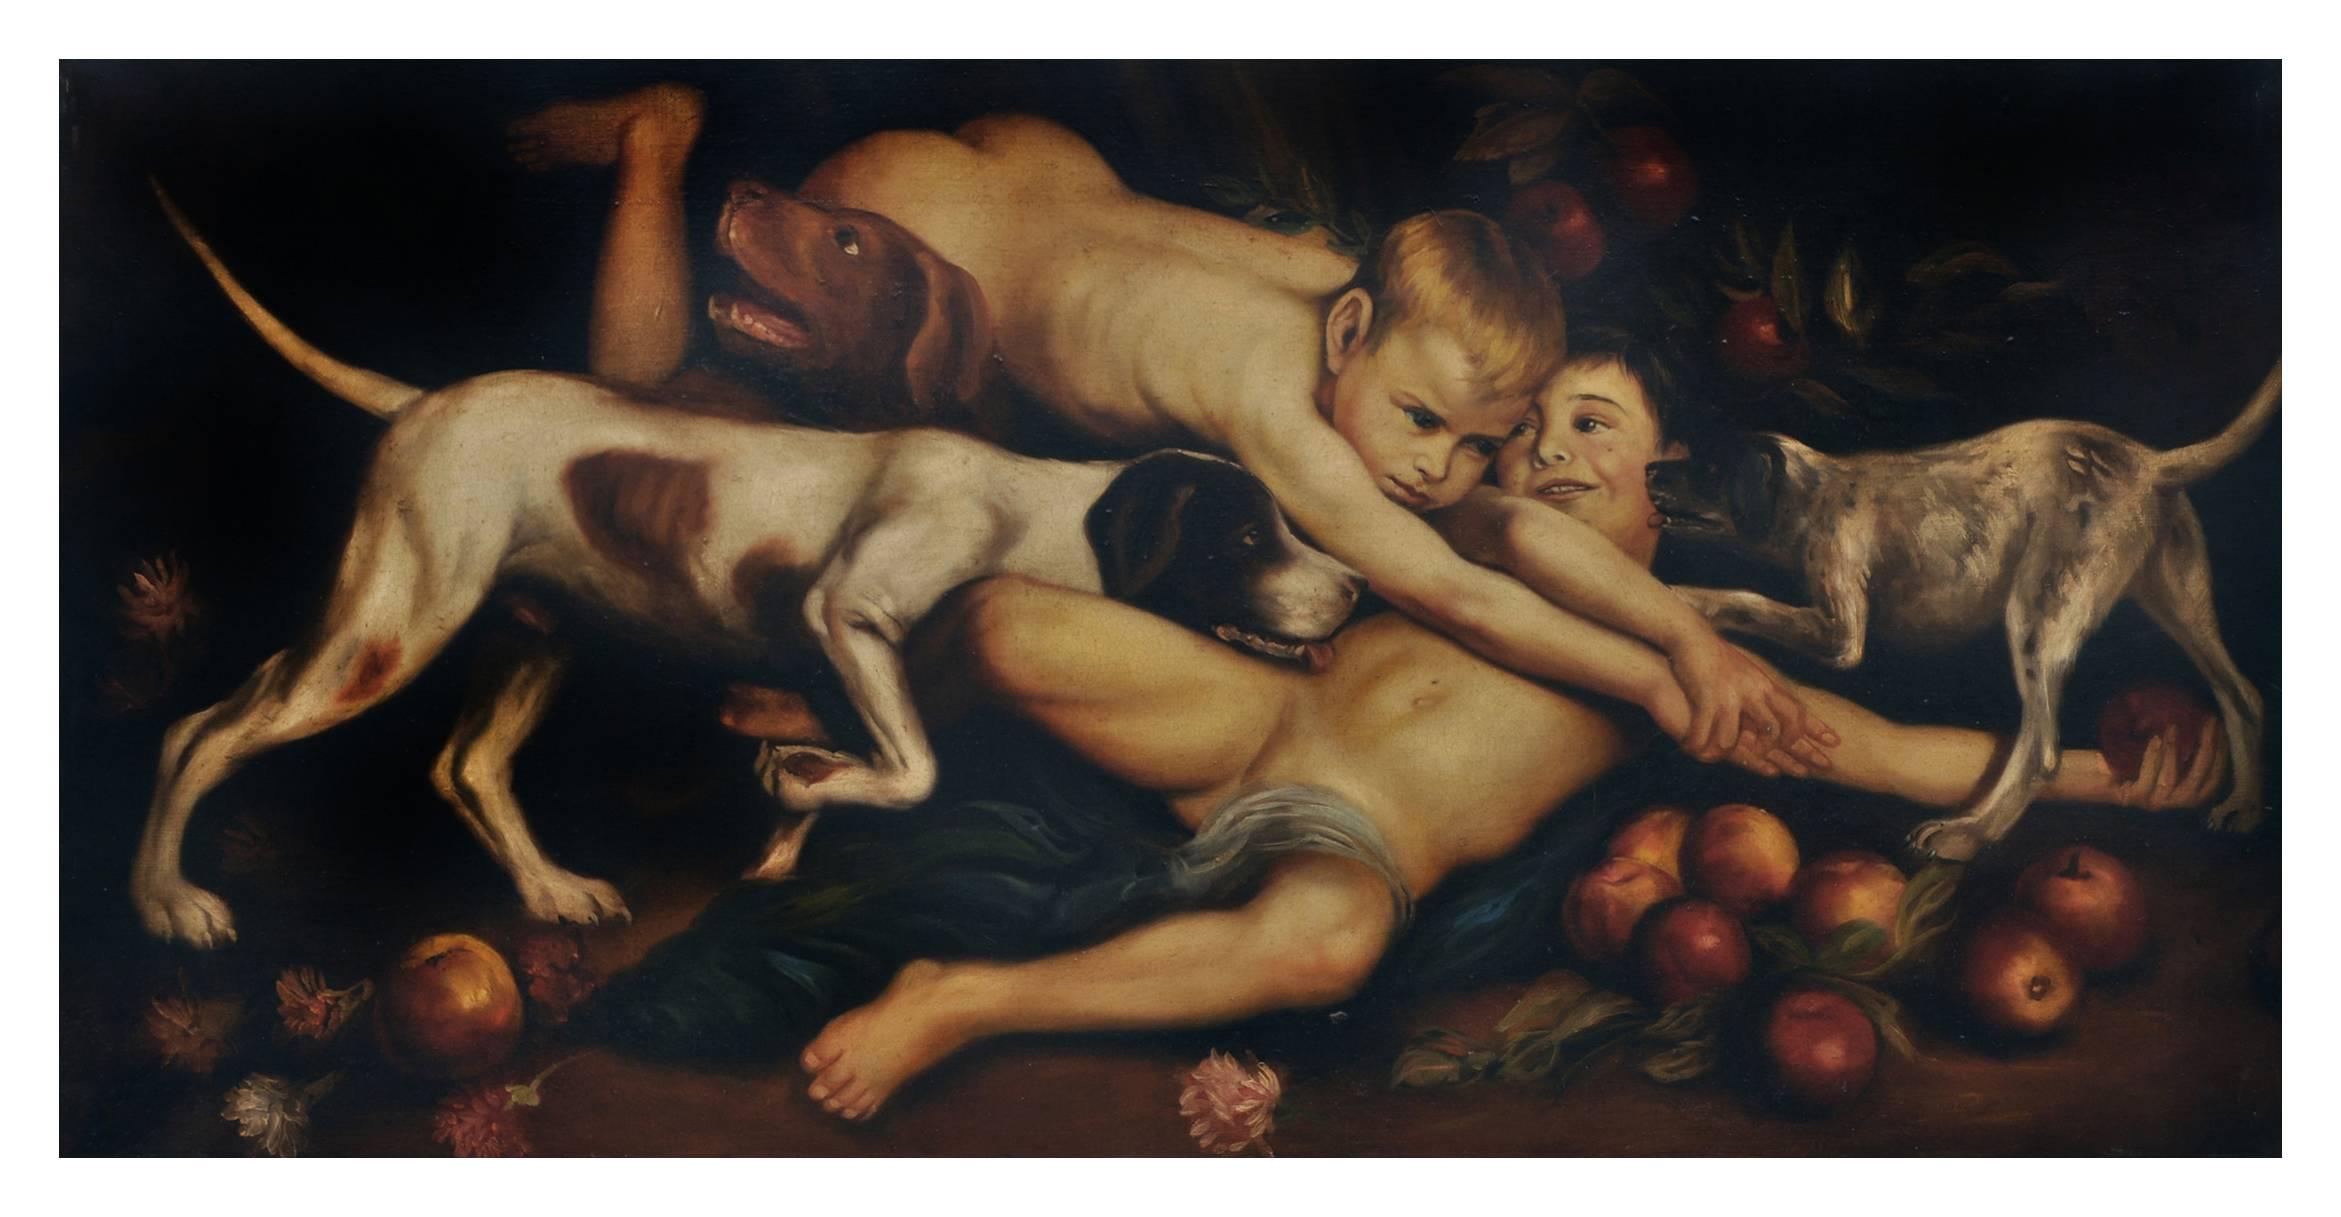 Cherubim playing - Giulio Di Sotto Italia 2004 - Oil on canvas cm. 50 x 100

Gold dilded wooden frame available on request.

The proposed painting represents two putti playing ..
Clear contrast of chiaroscuro, with the two cherubs that stand out